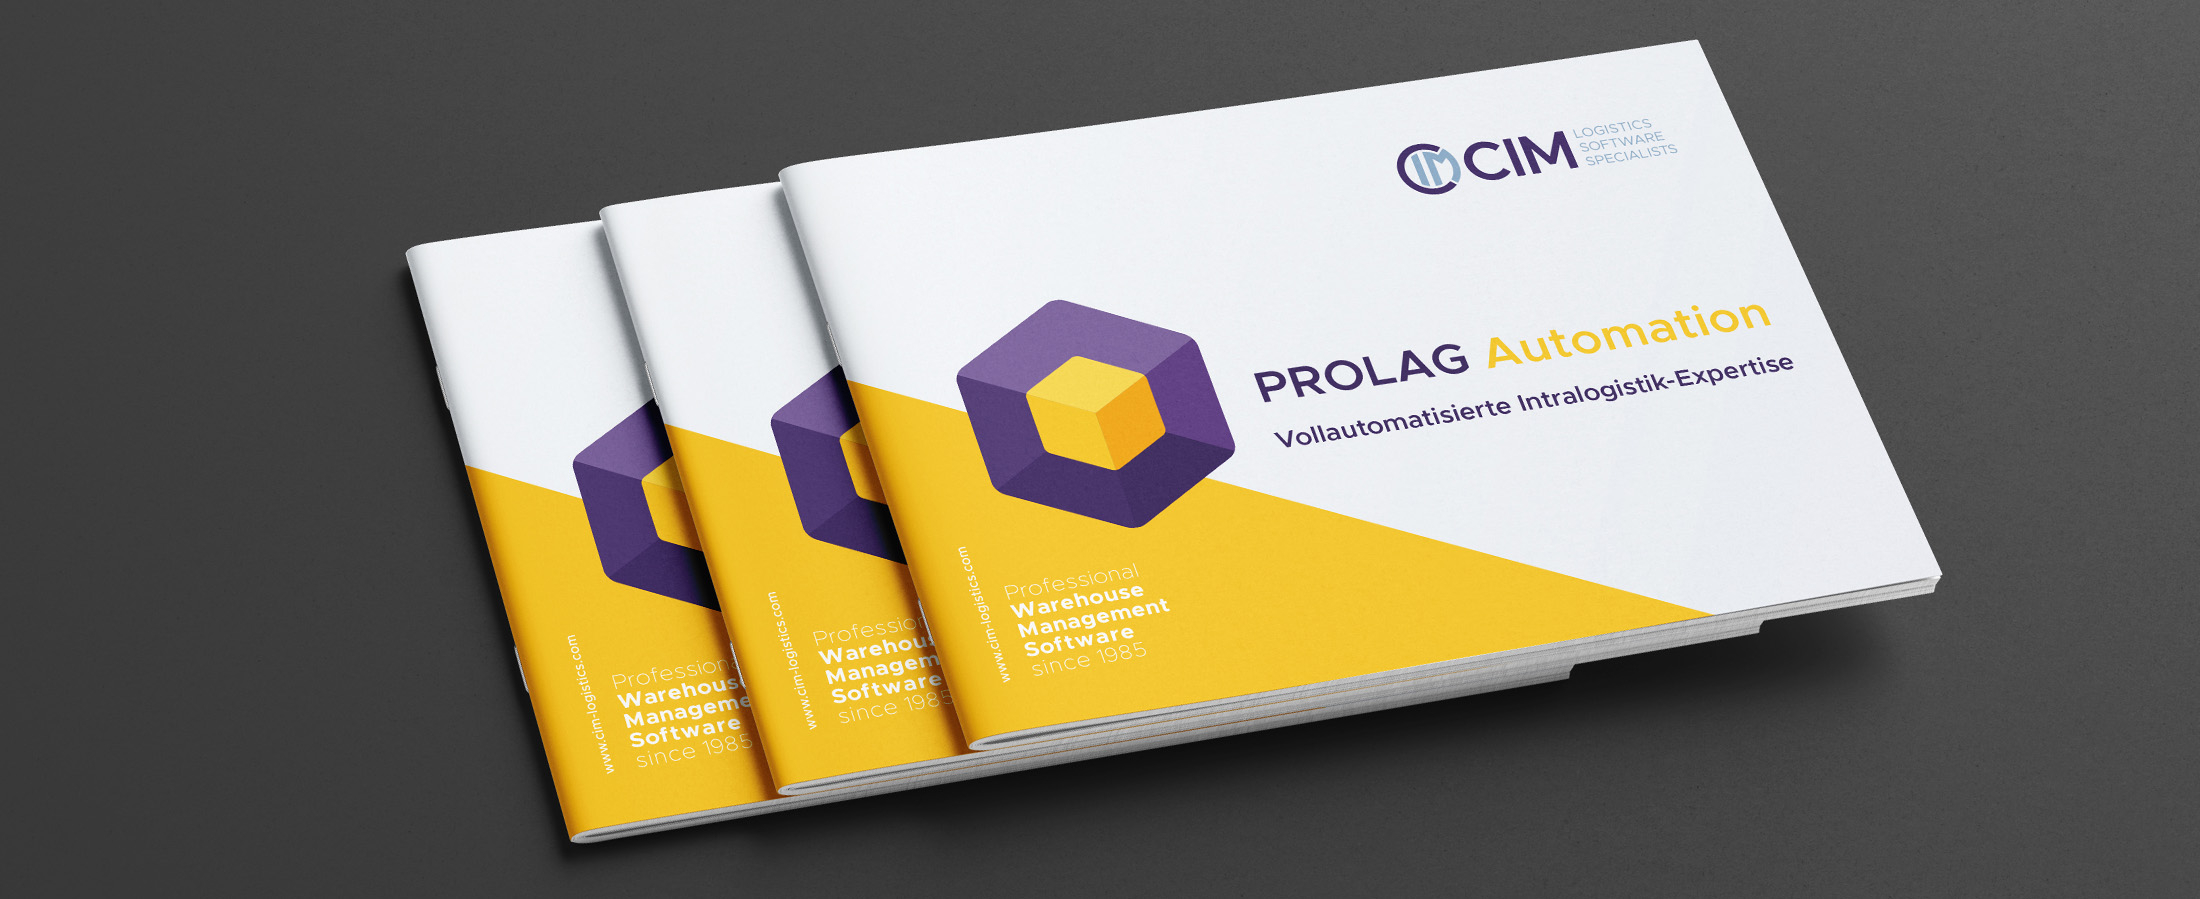 PROLAG World solutions brochure Automation